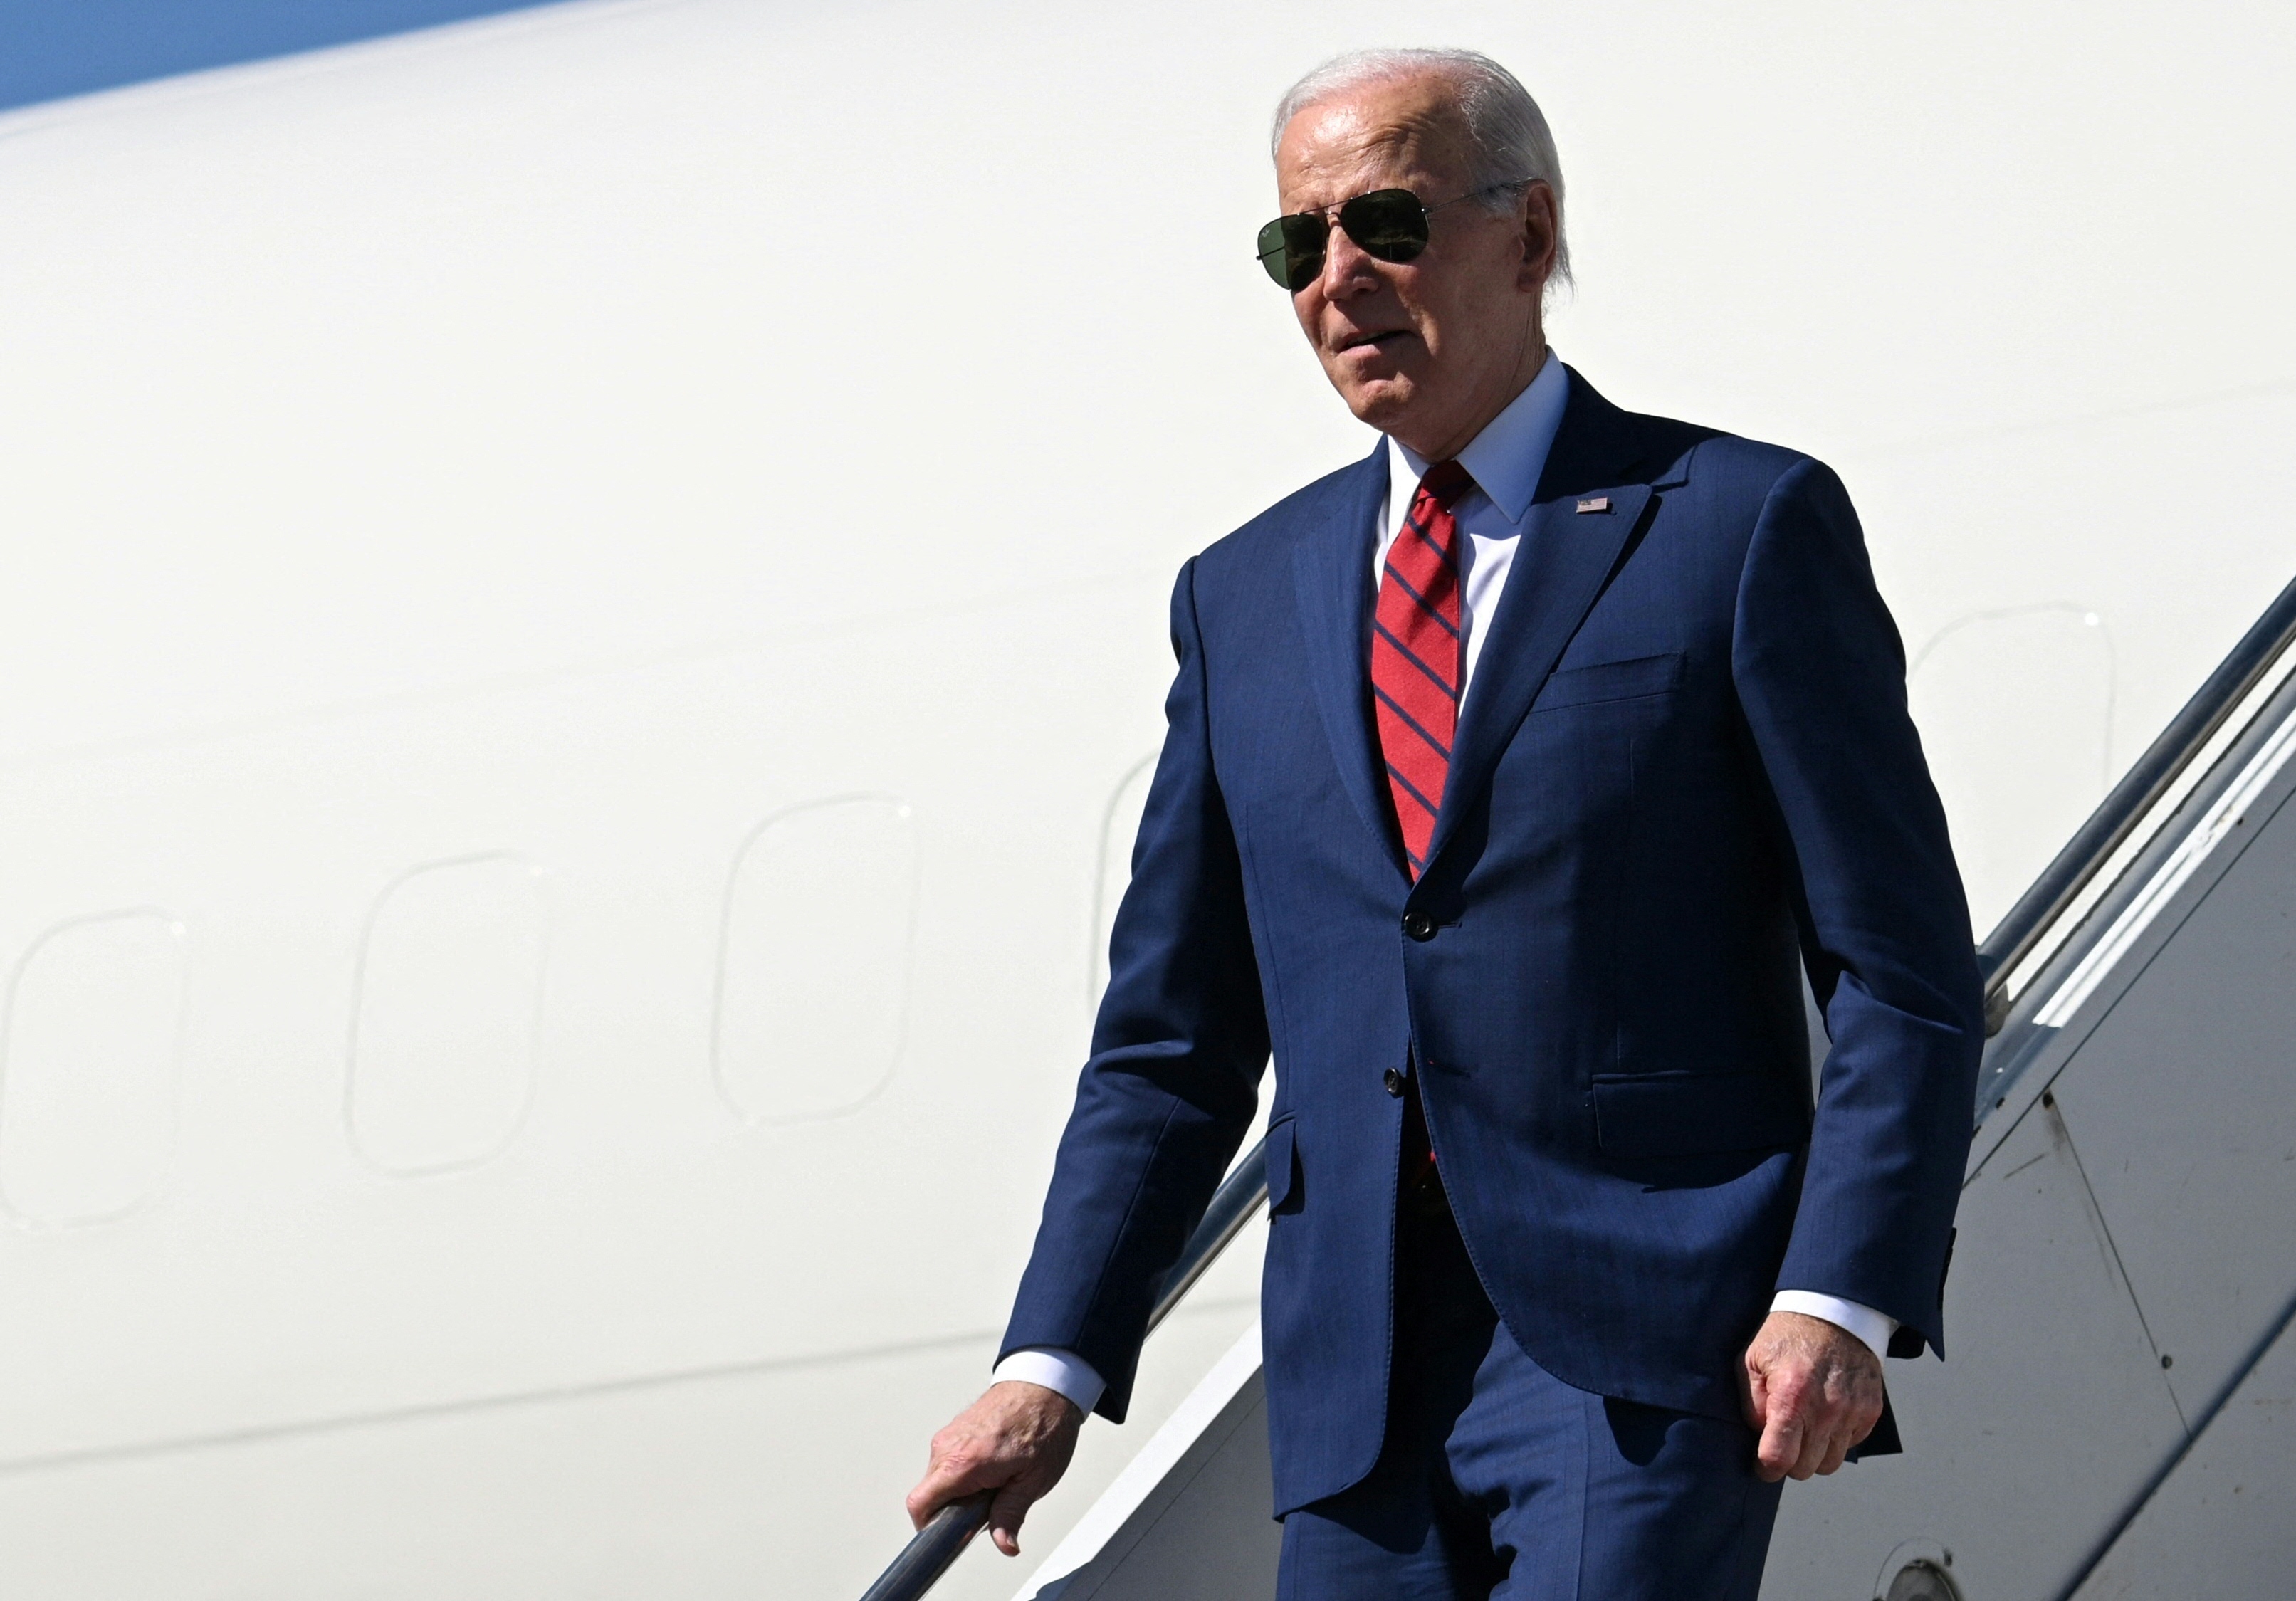 Is Biden Using 'Fake' Air Force One in Video?